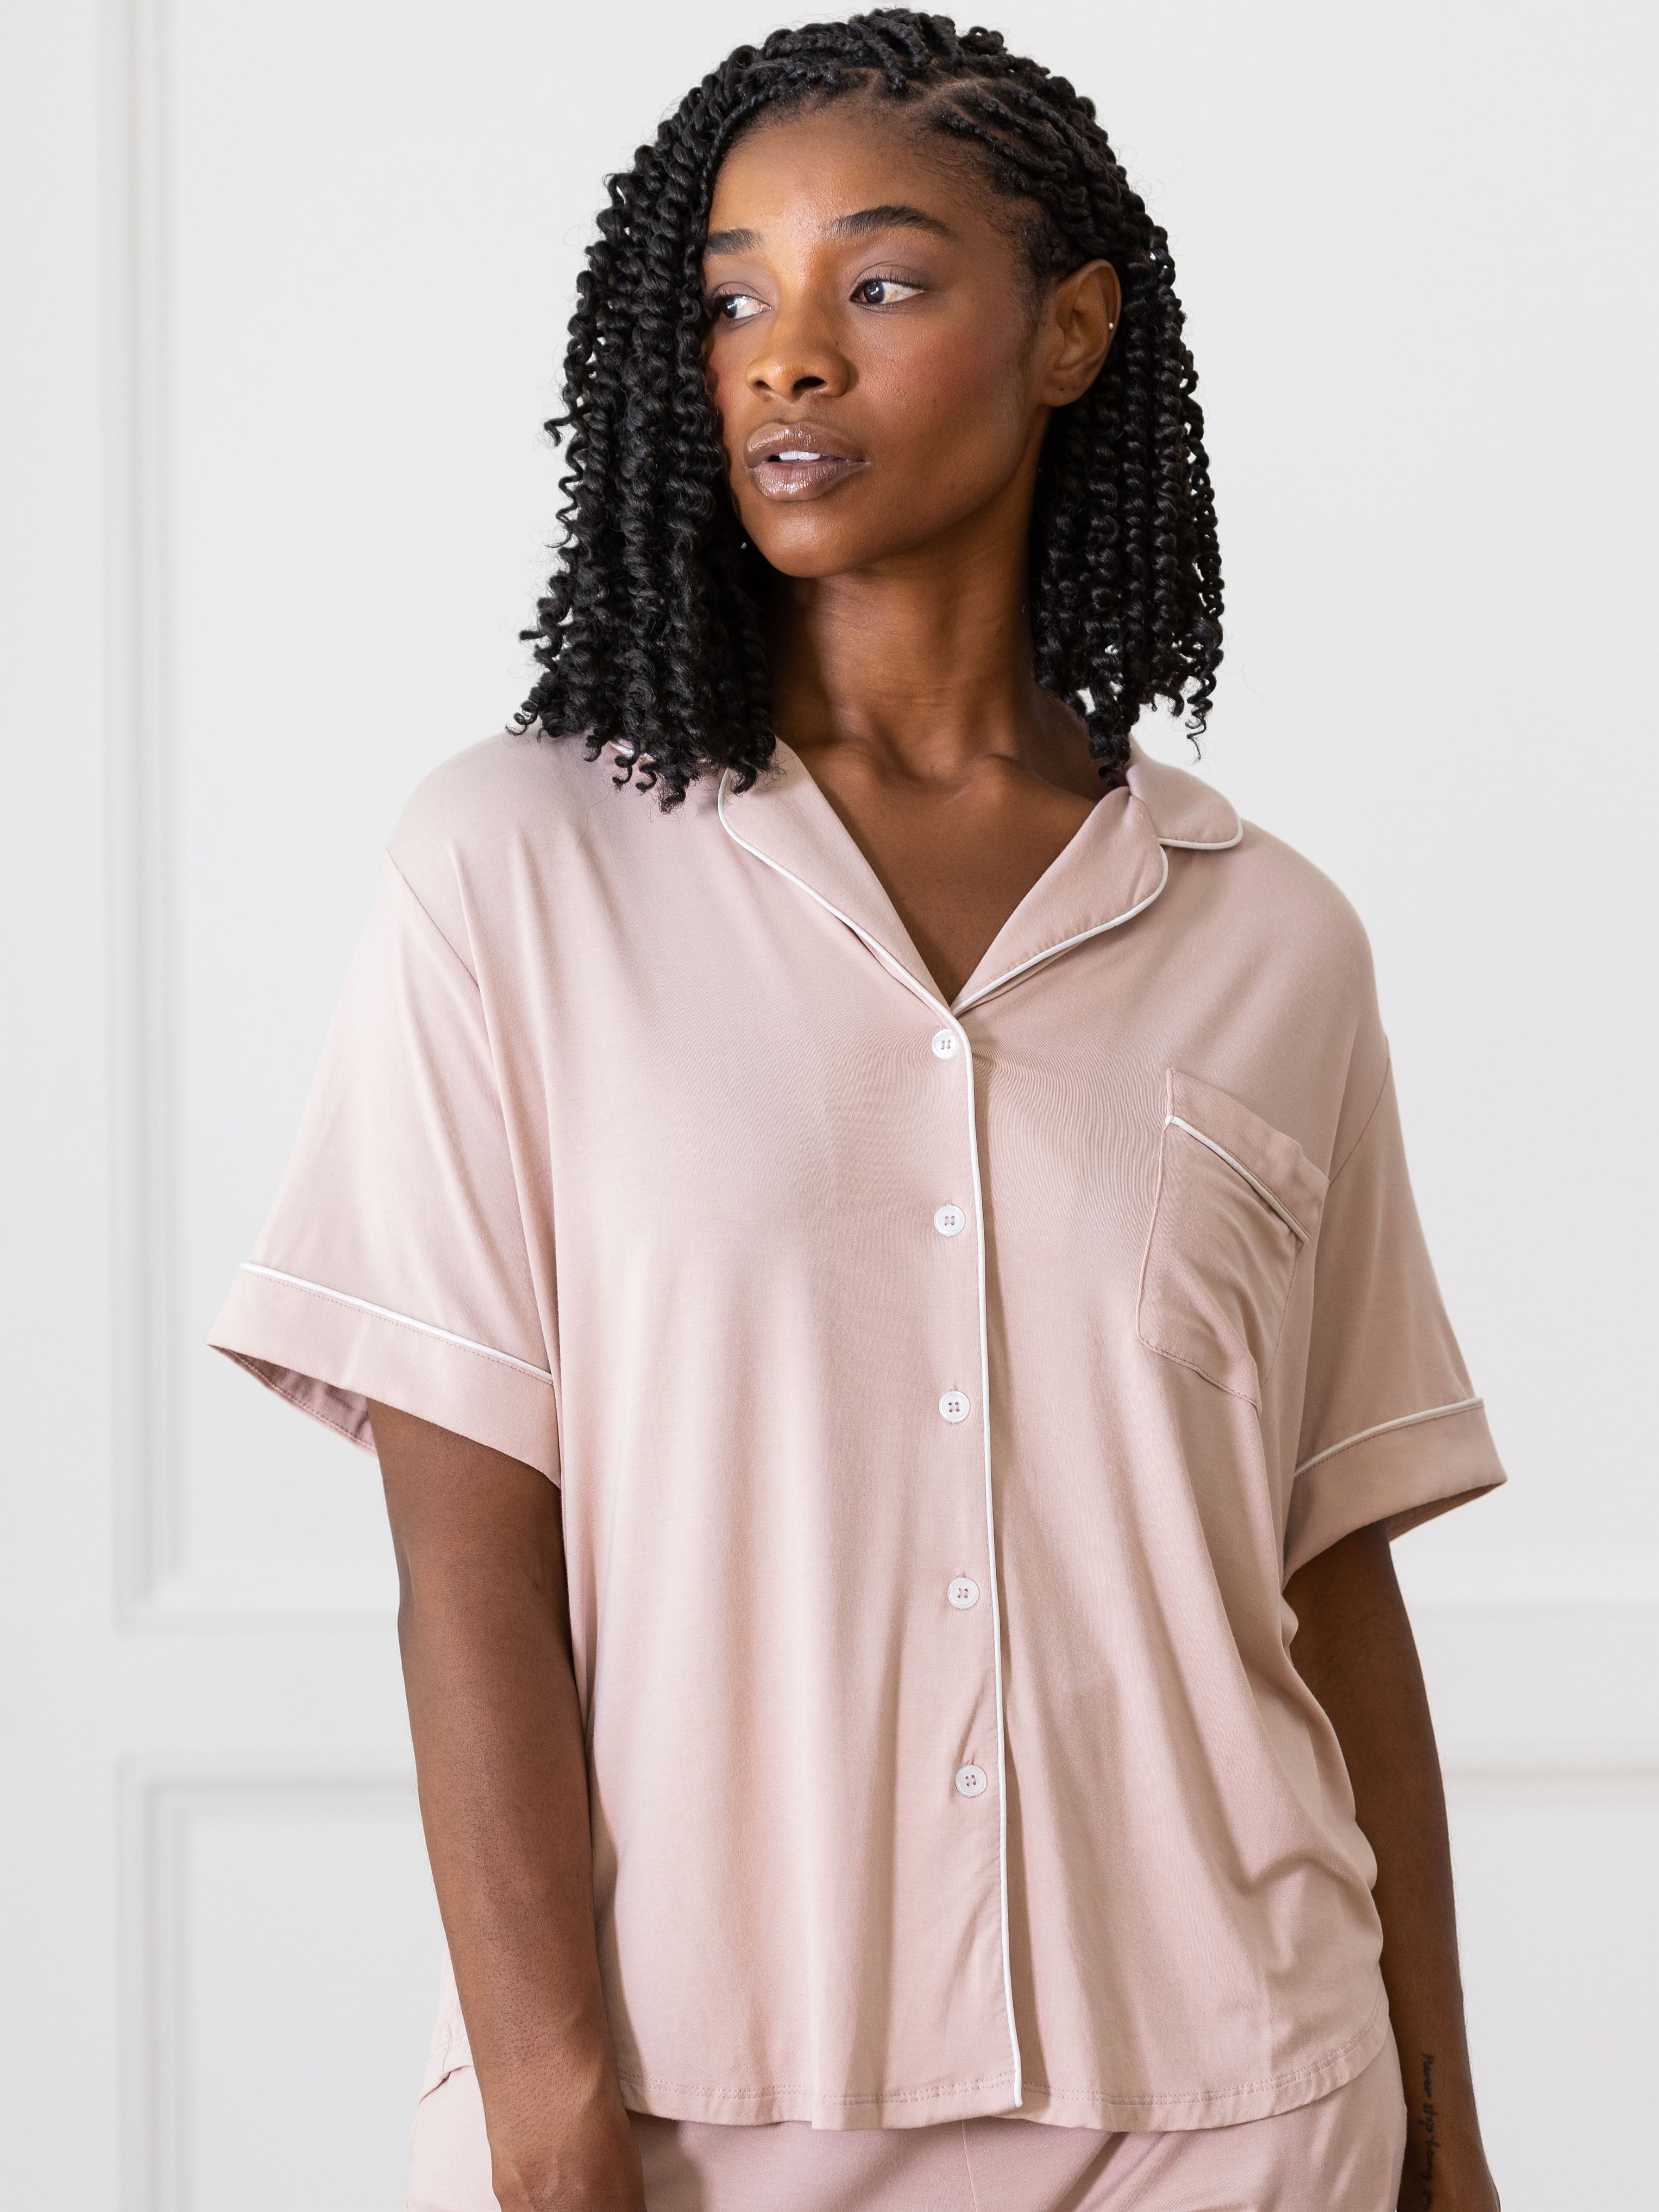 Blush Short Sleeve Pajama Set modeled by a women. The photo was taken in a light setting; showing off the pajamas. |Color:Blush